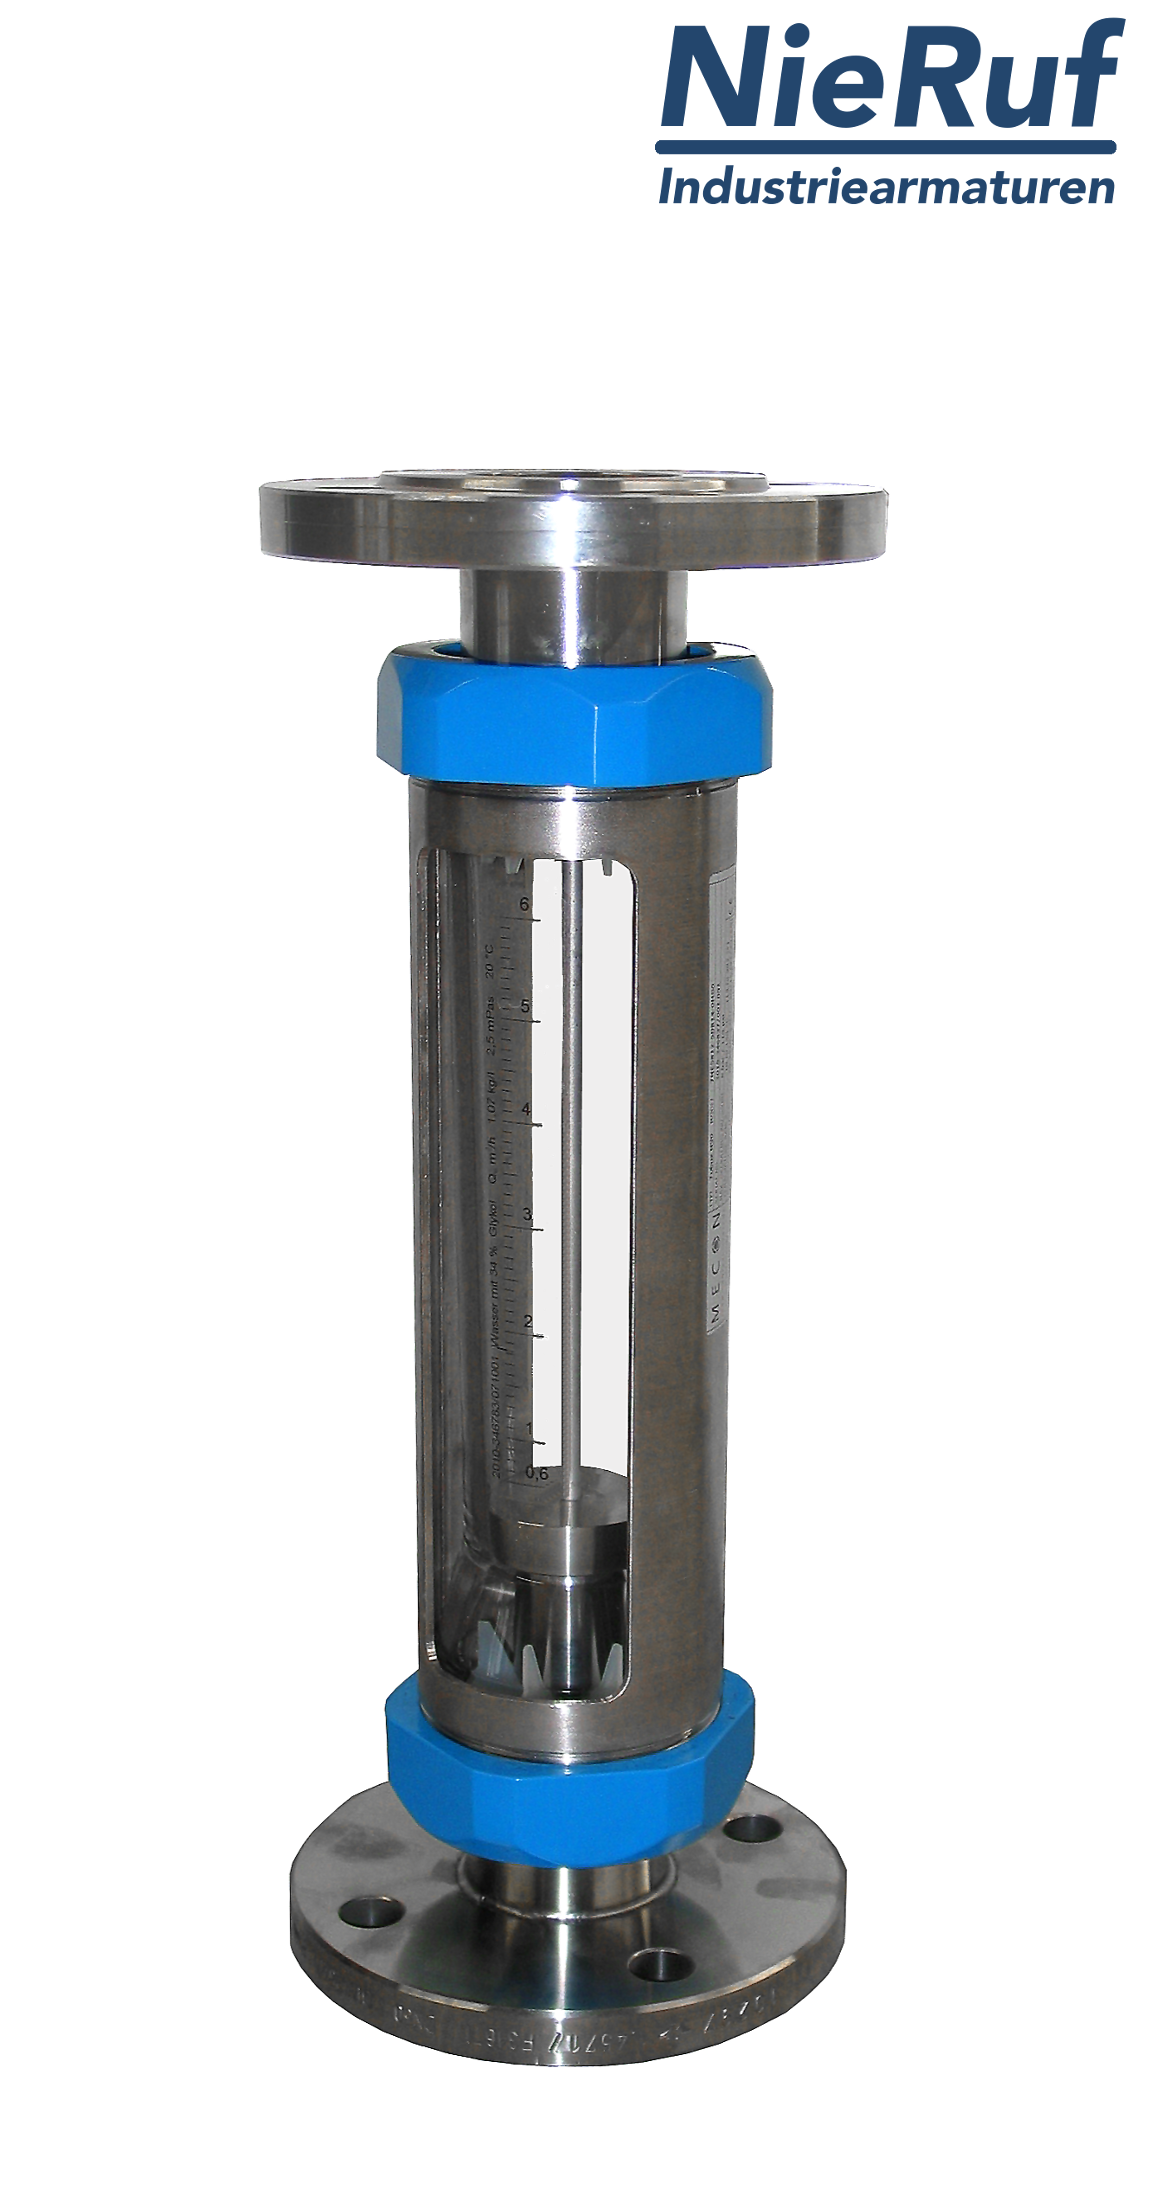 Variable area flowmeter stainless steel + borosilicate flange DN20 6.5 - 65.0 l/h water FKM